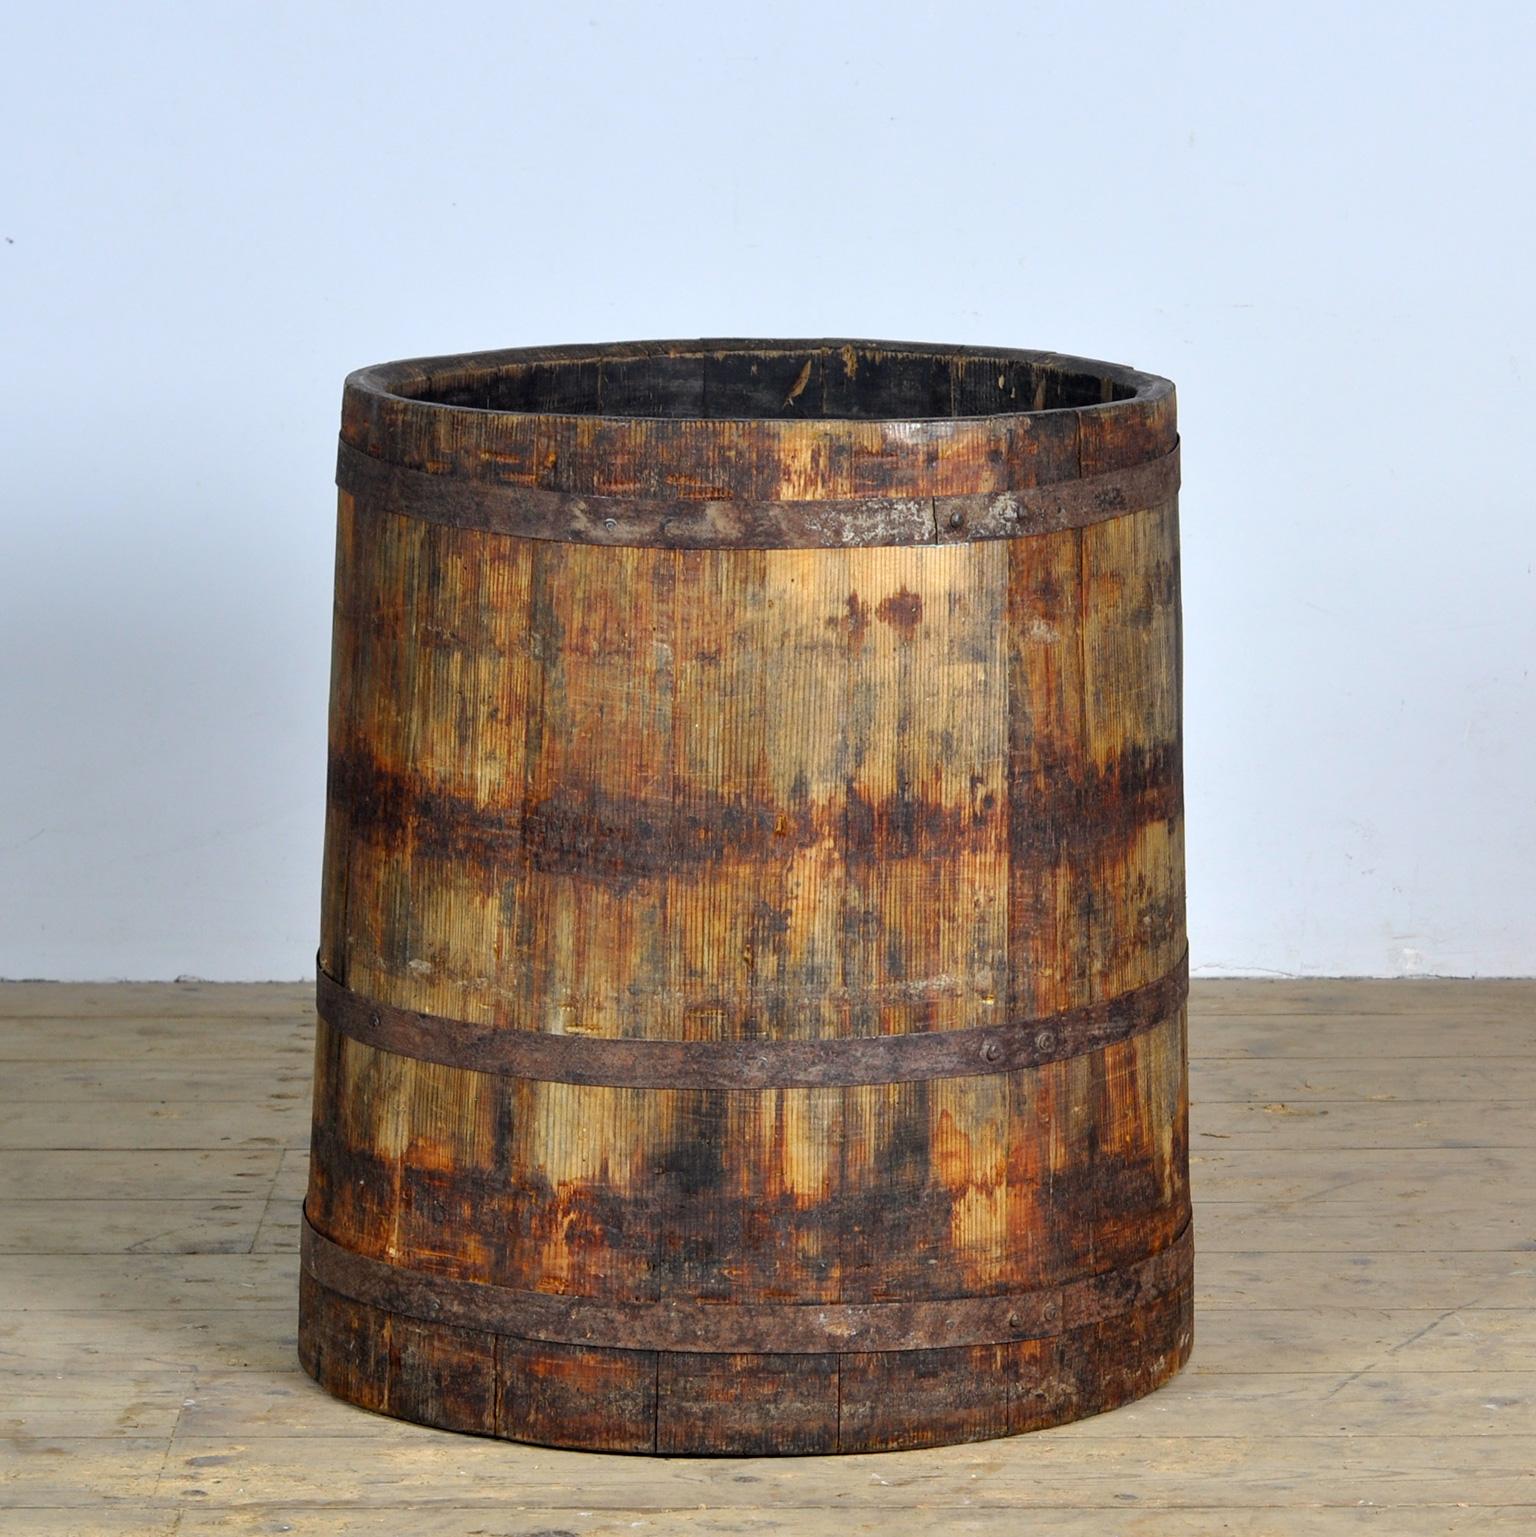 Oak barrel that was previously used to store grain, etc. The barrel is reinforced with iron rings.
For example, it can be used as a planter. Circa 1920.